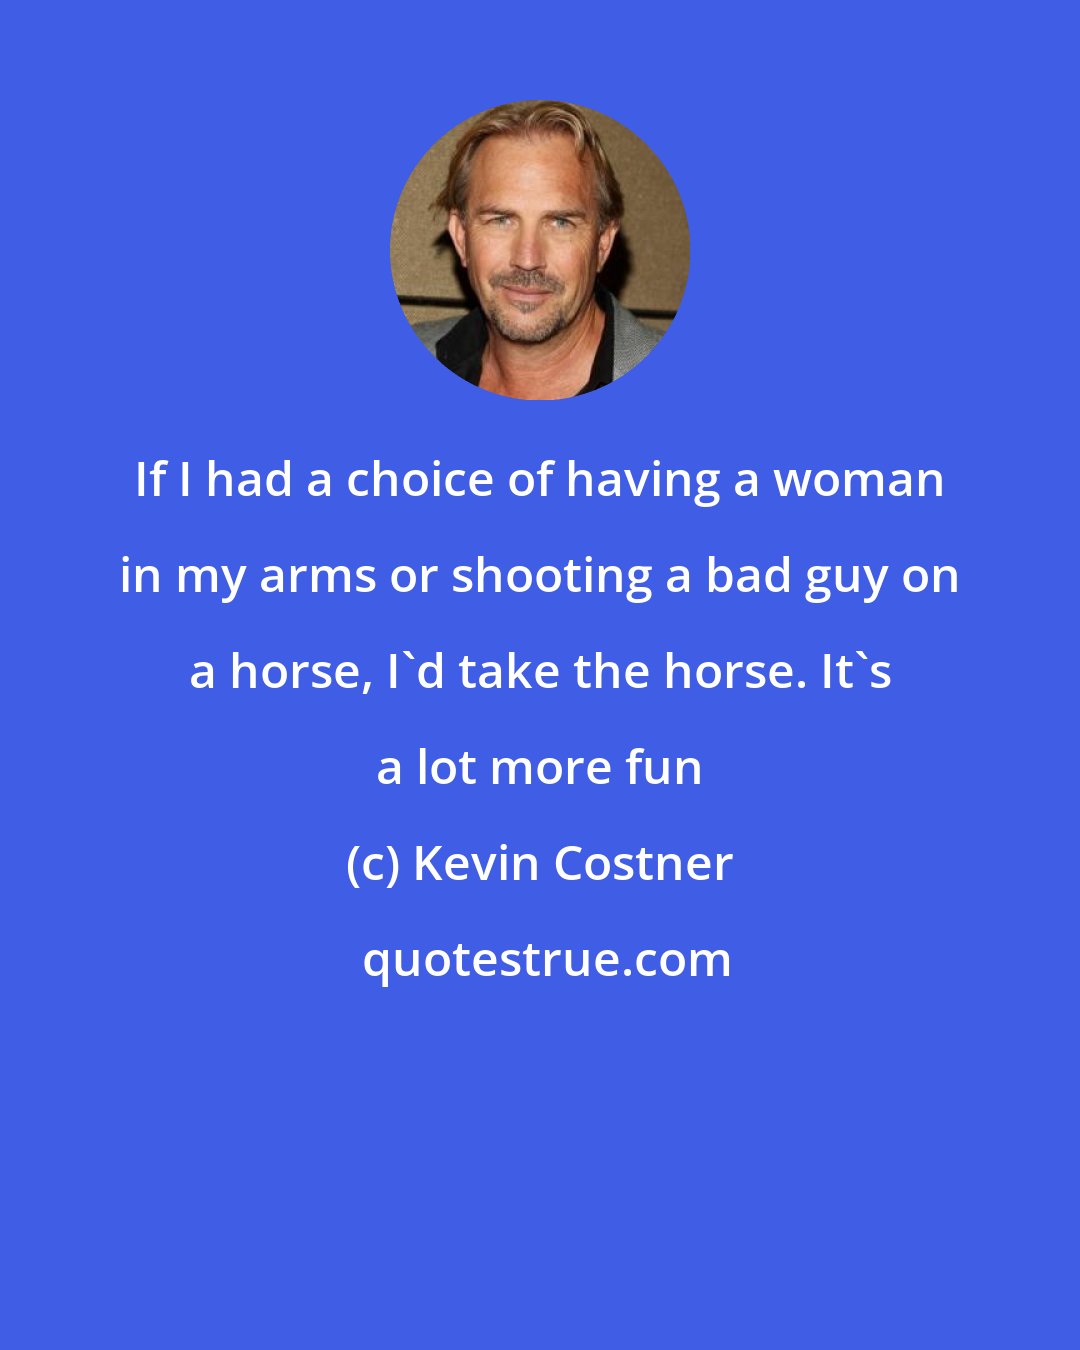 Kevin Costner: If I had a choice of having a woman in my arms or shooting a bad guy on a horse, I'd take the horse. It's a lot more fun